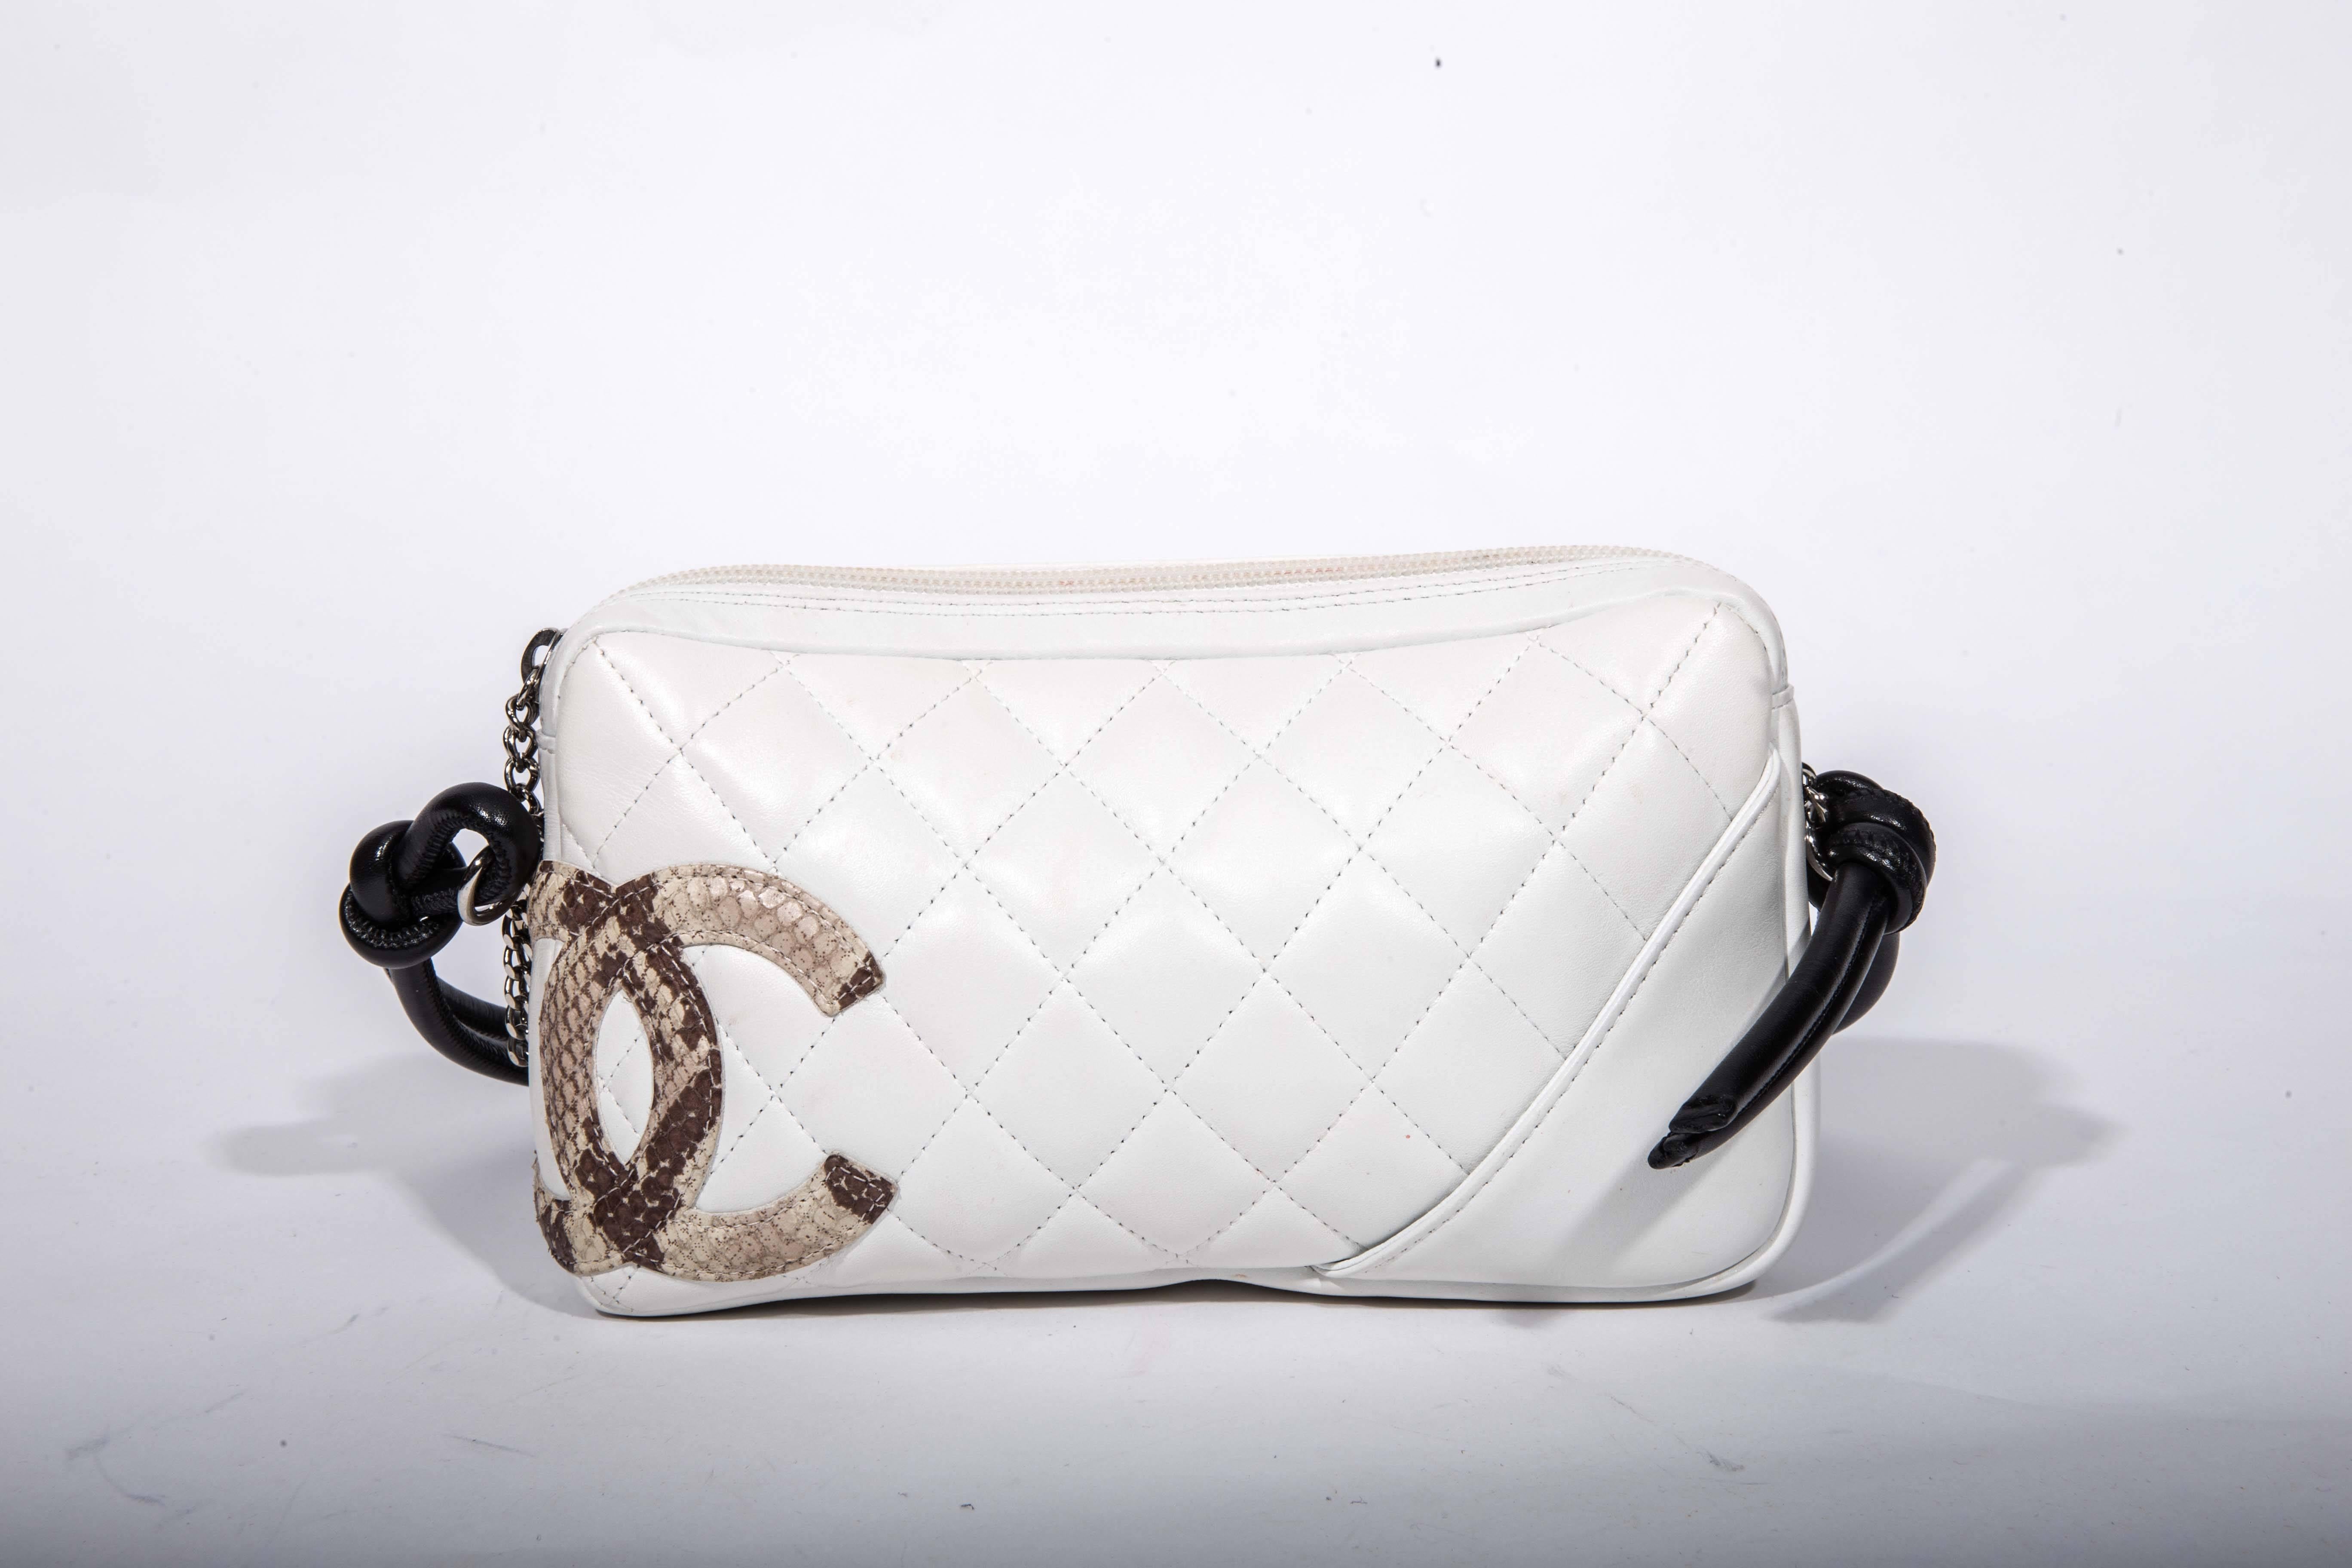 Beautiful pre-owned chic and stylish bag from the Chanel Ligne Cambon collection. 100% authentic. The gorgeous white quilted leather bag features a stylish beige snakeskin CC logo, black leather double strap and silvertone hardware that includes a